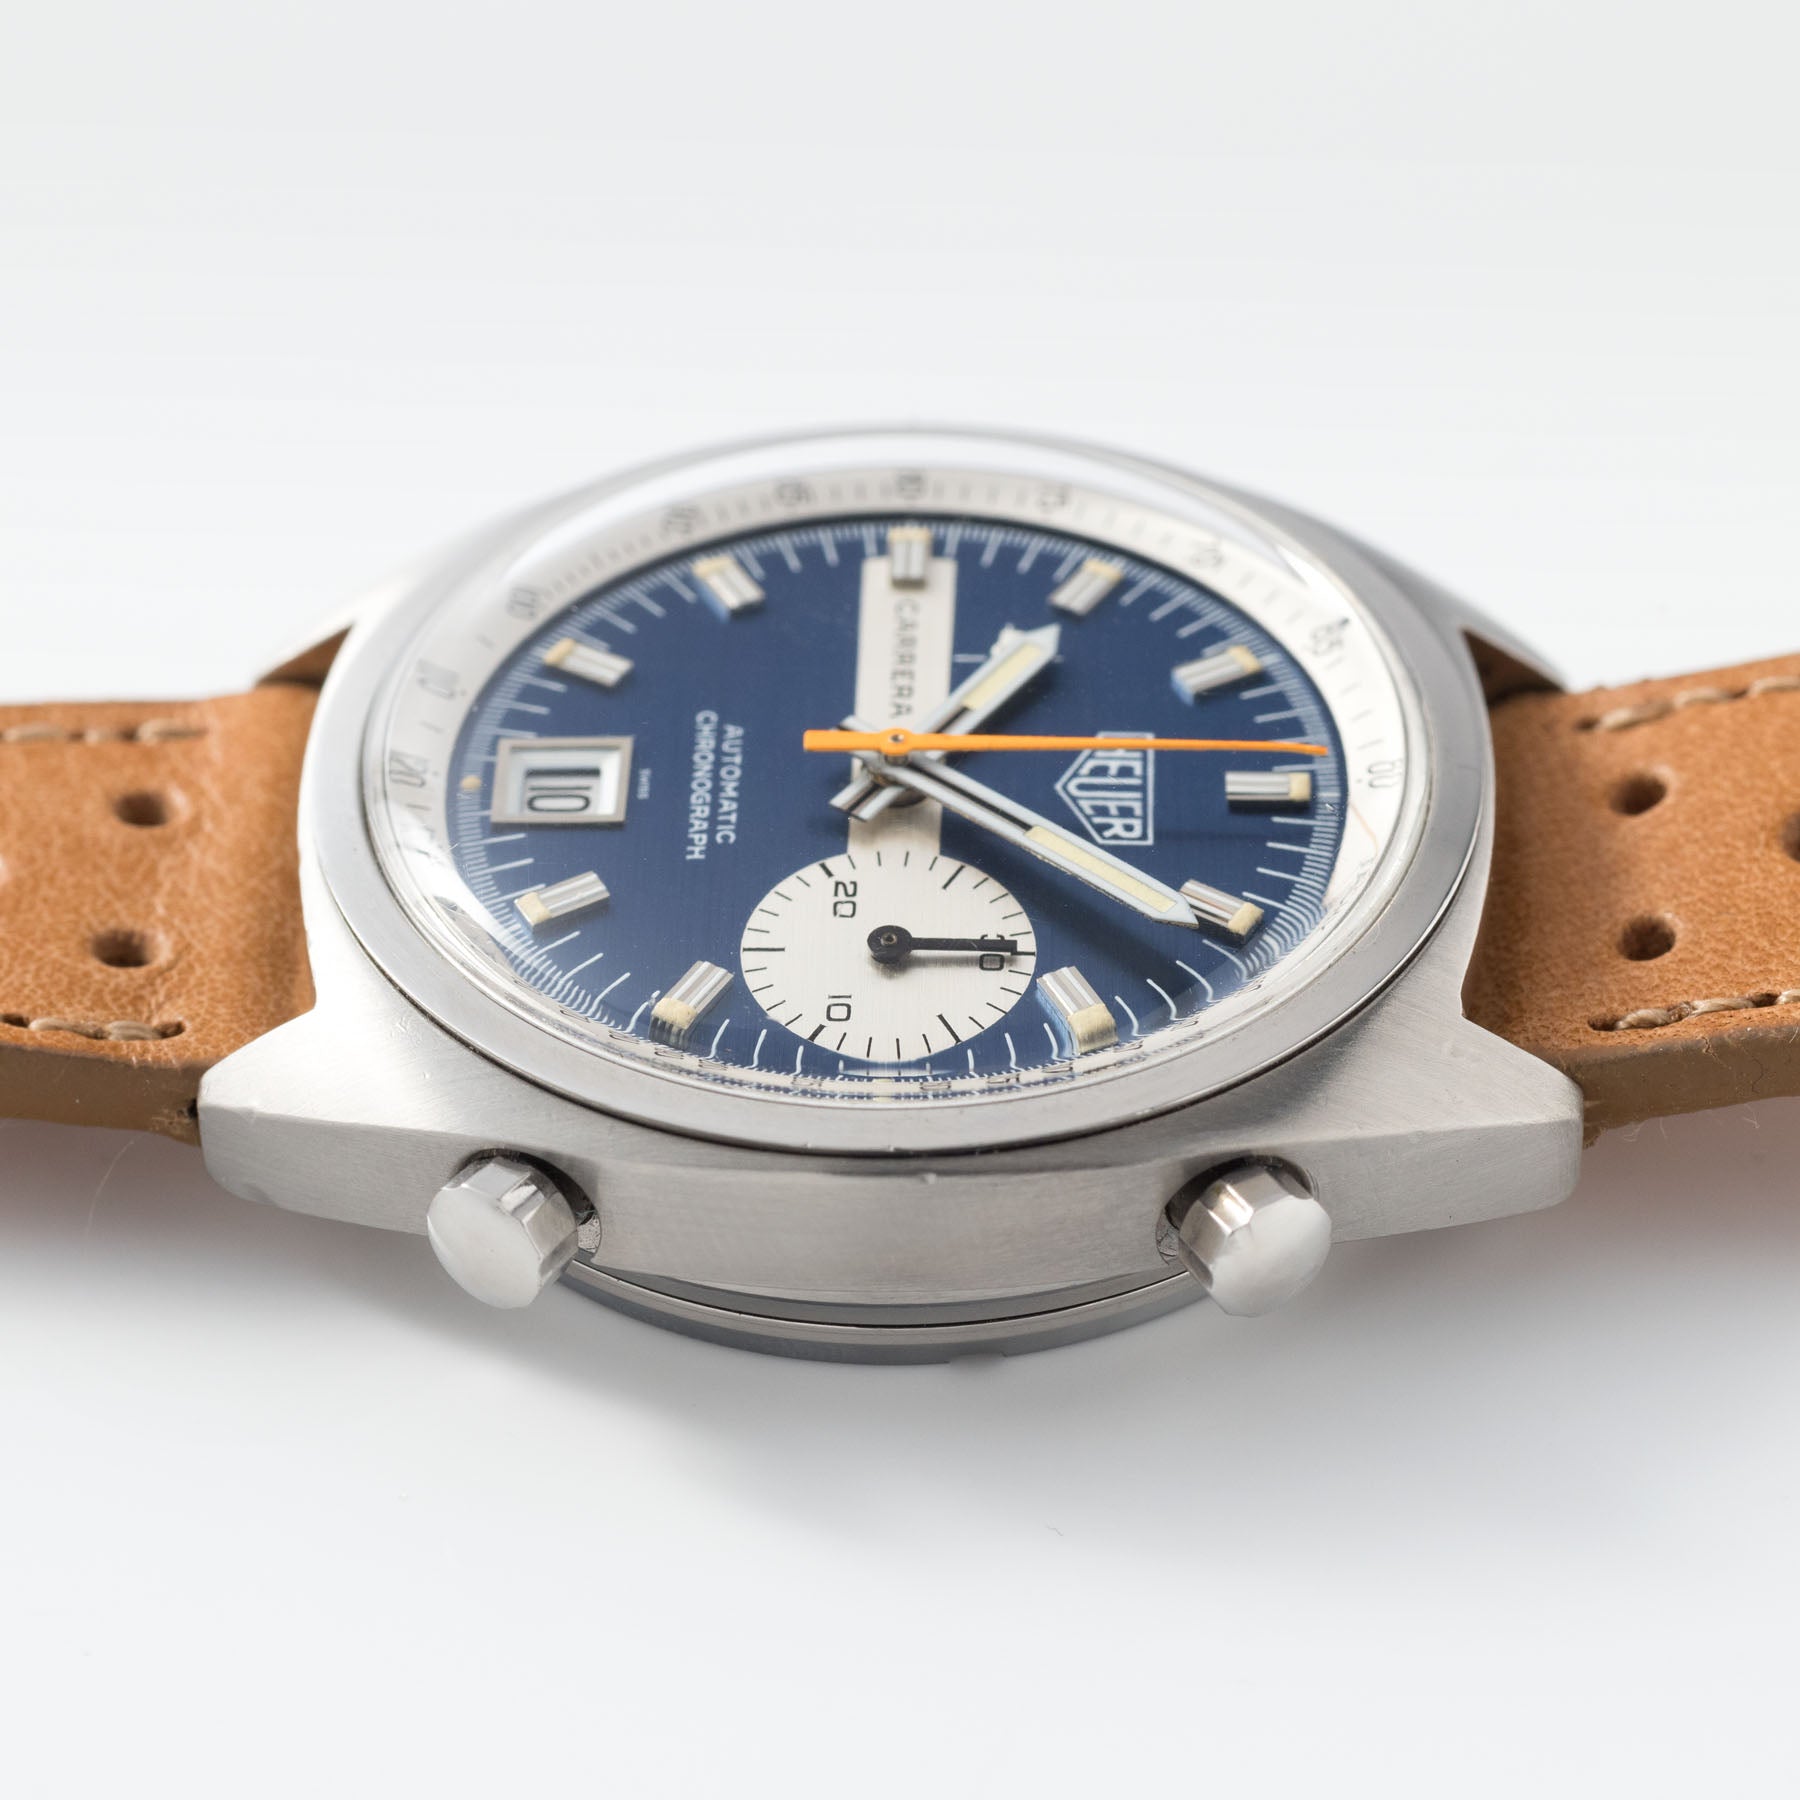 Heuer Carrera Blue Dial Reference 1553